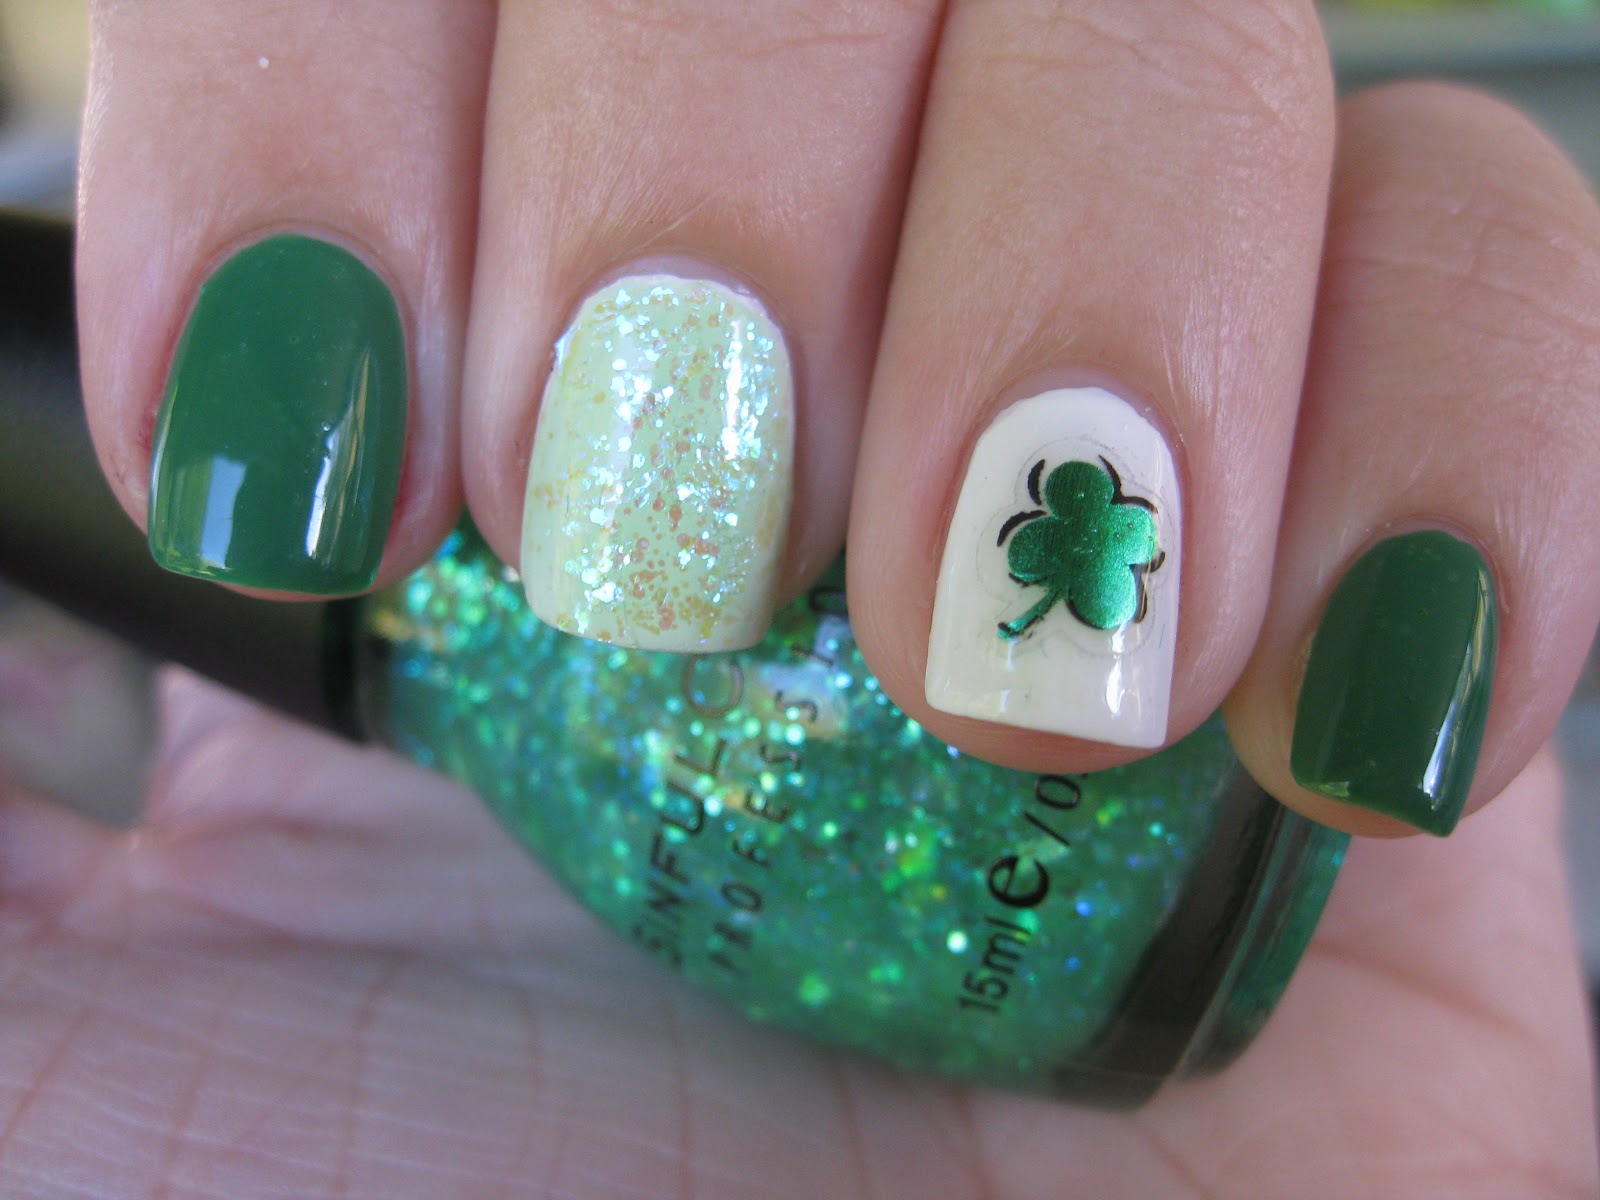 Clover Nail Designs for St. Patrick's Day - wide 5